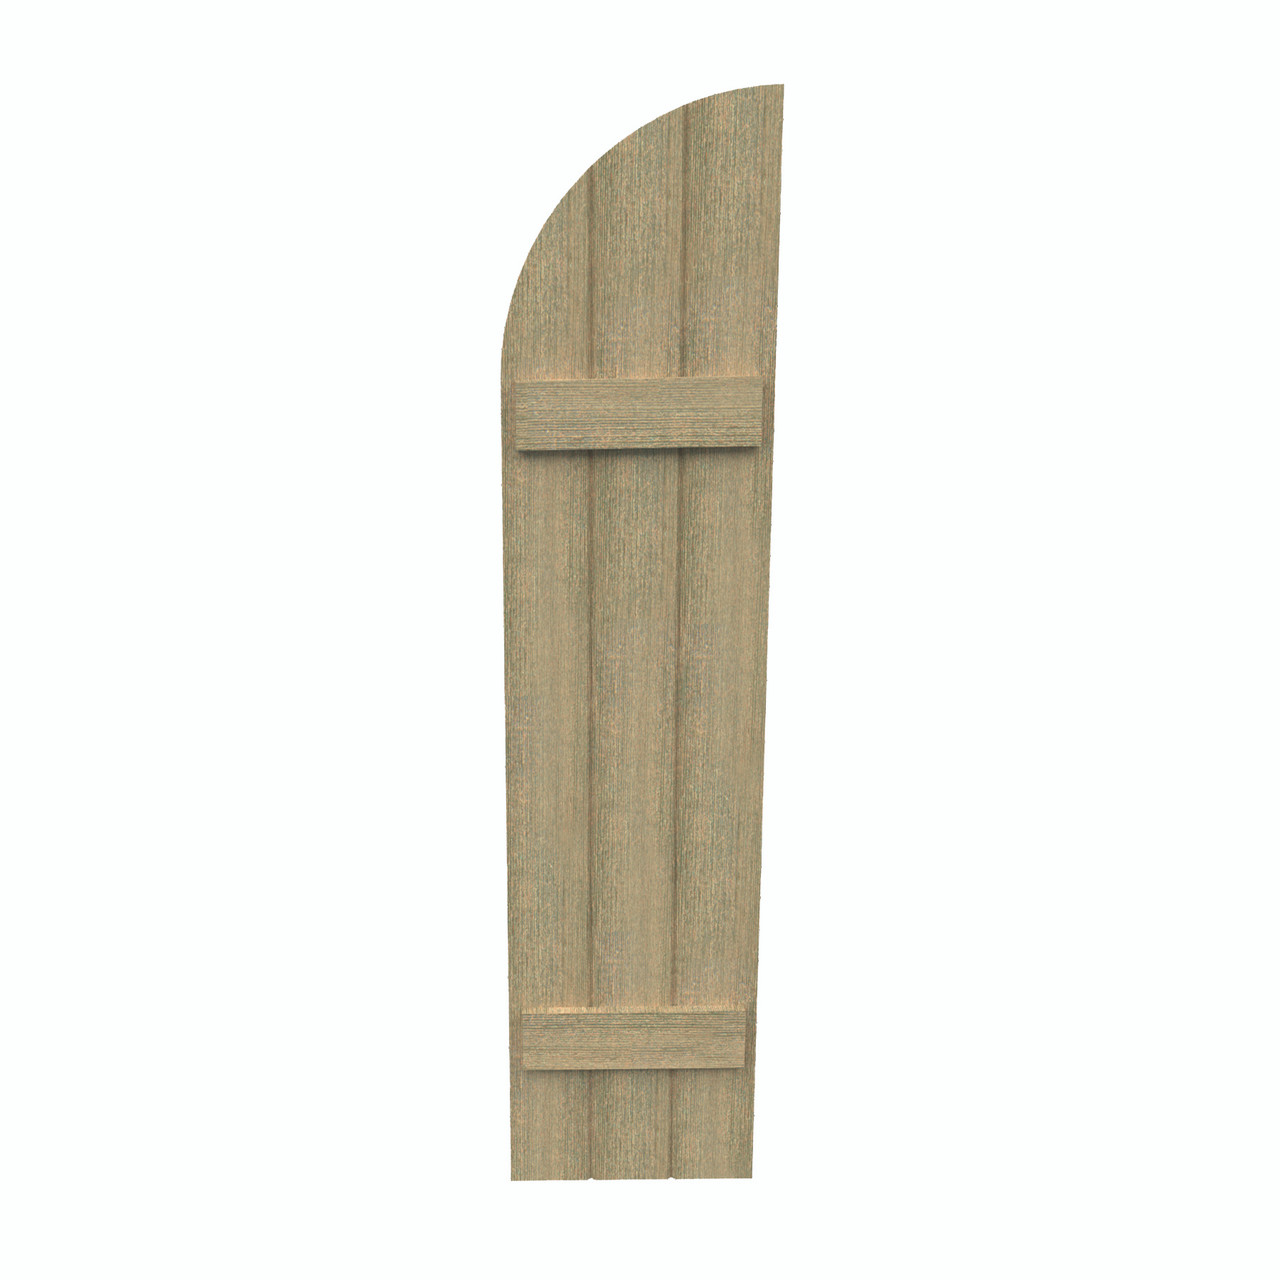 18 inch by 86 inch Quarter Round Shutter with 3-Boards